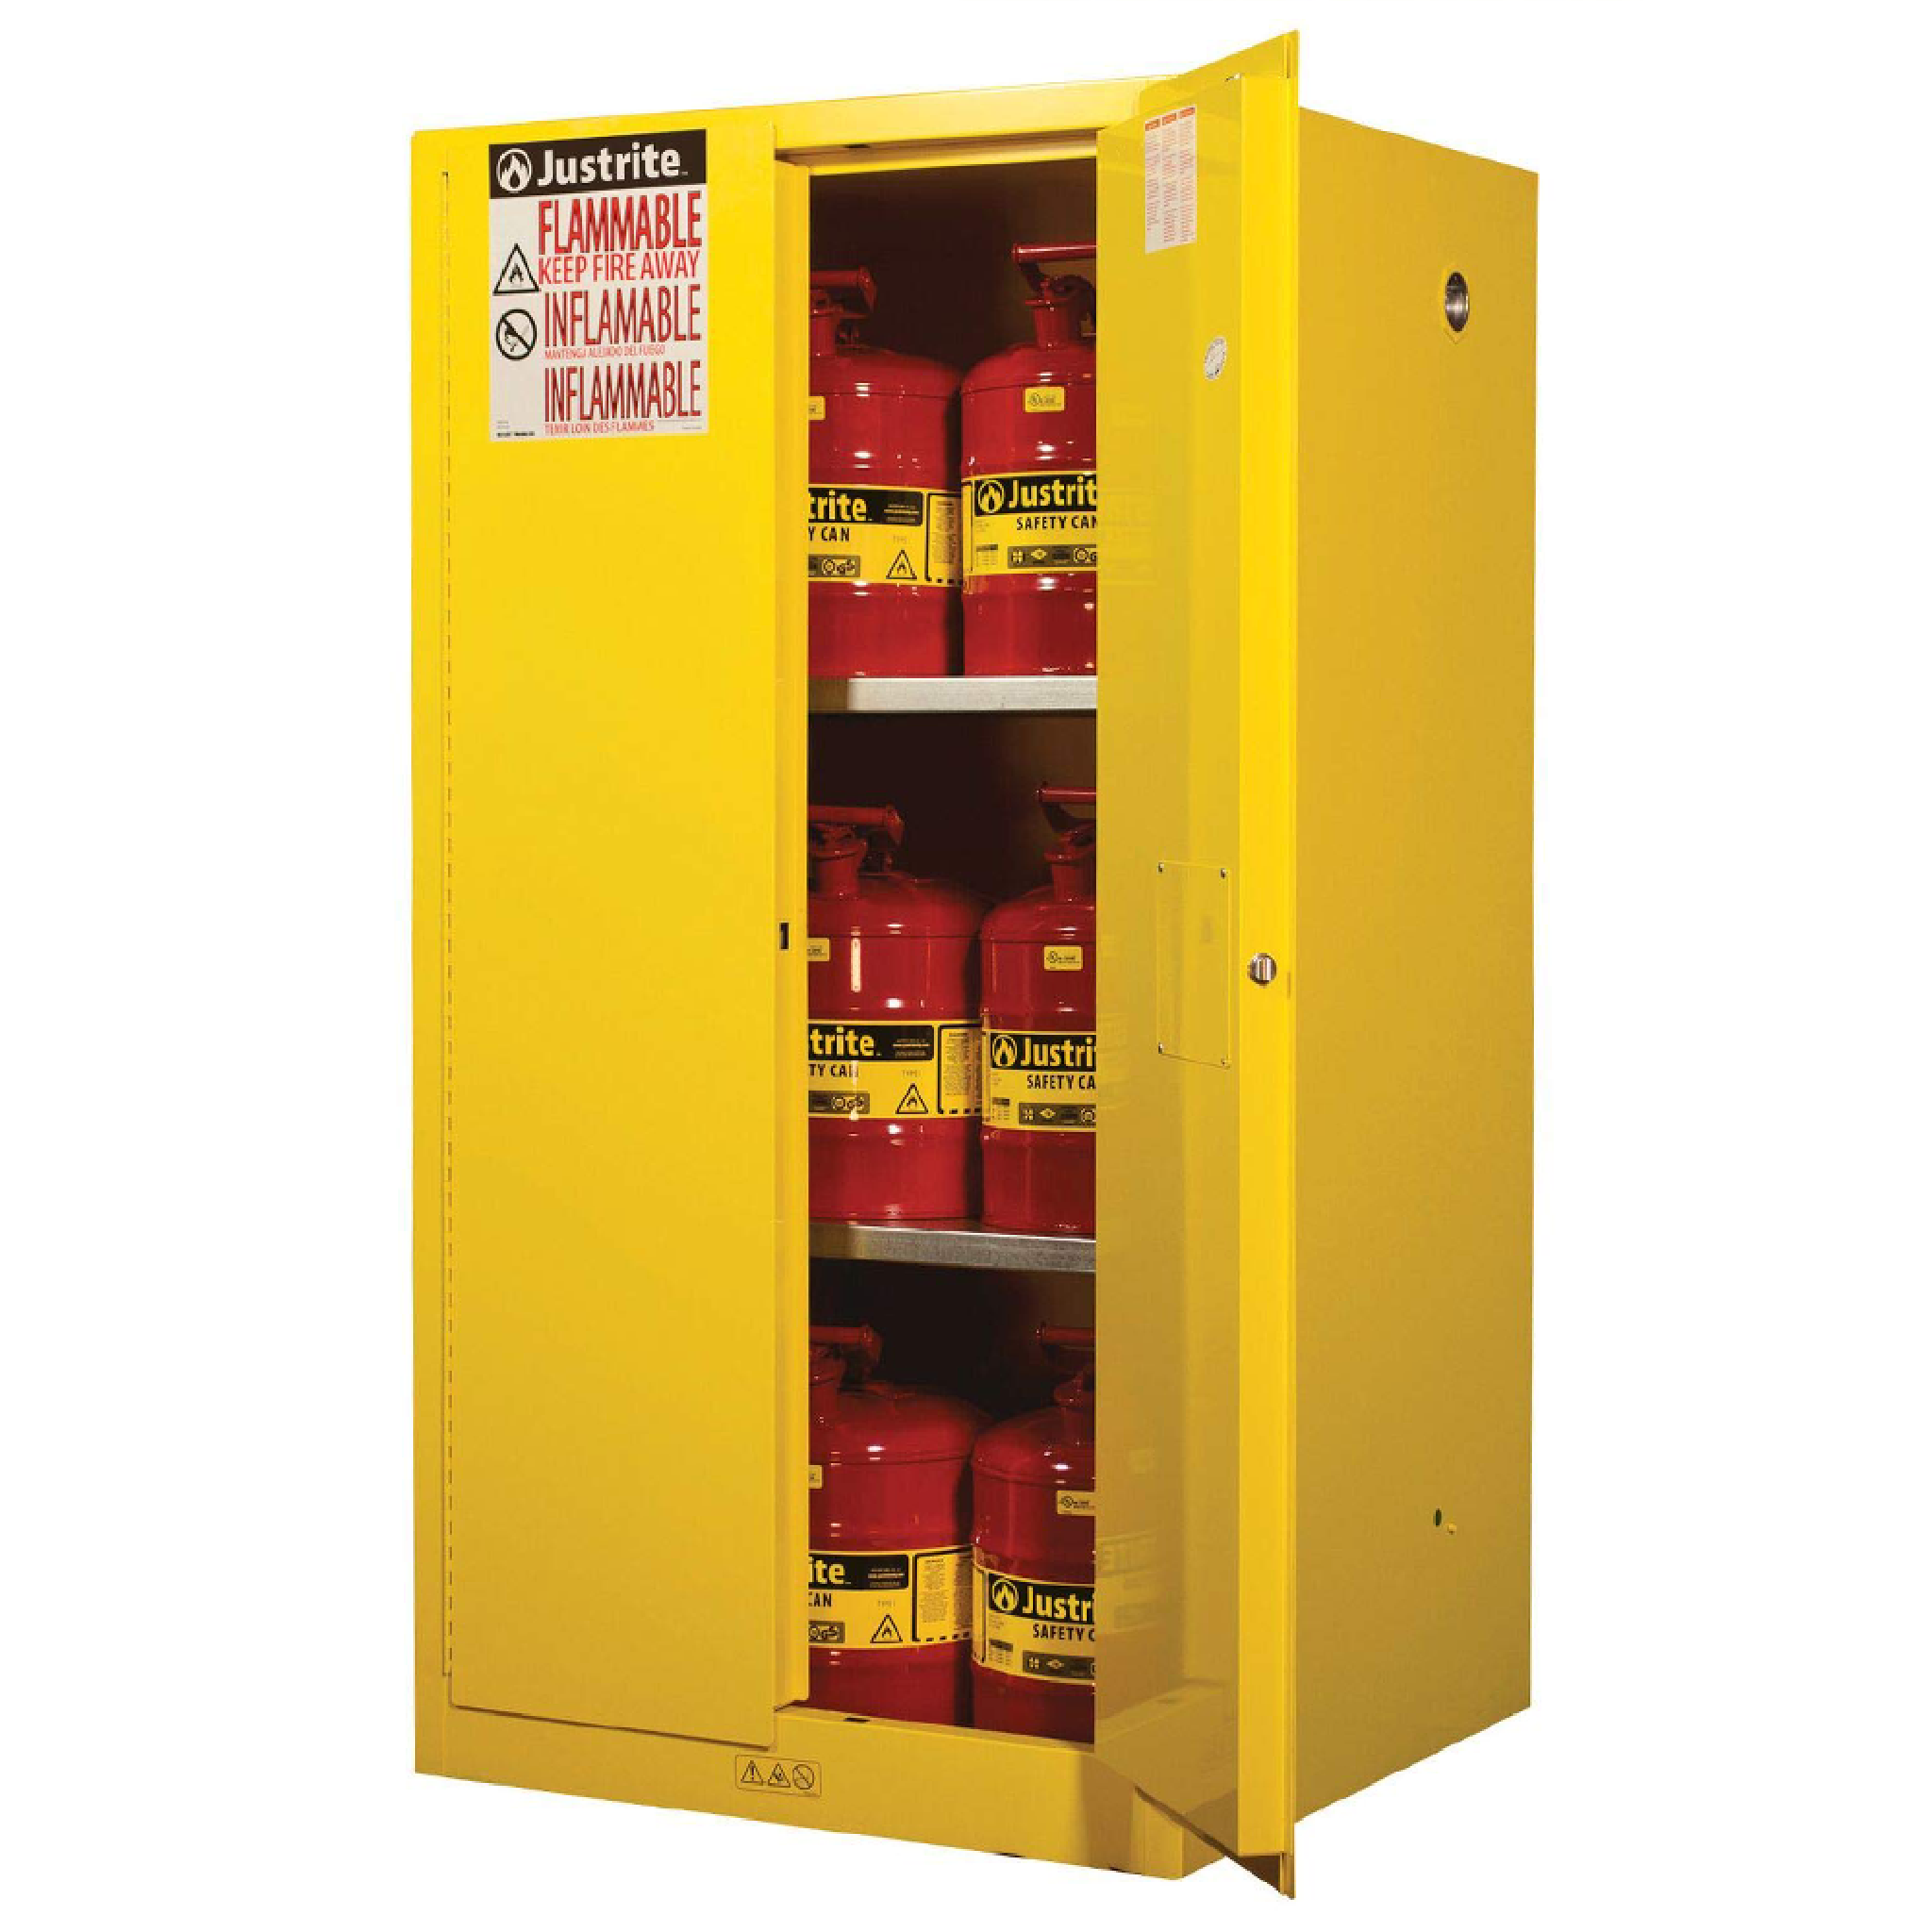 JUSTRITE 896000, Sure-Grip, Flammable Safety Cabinet, 60 GAL, 2 Shelves, 2 Doors